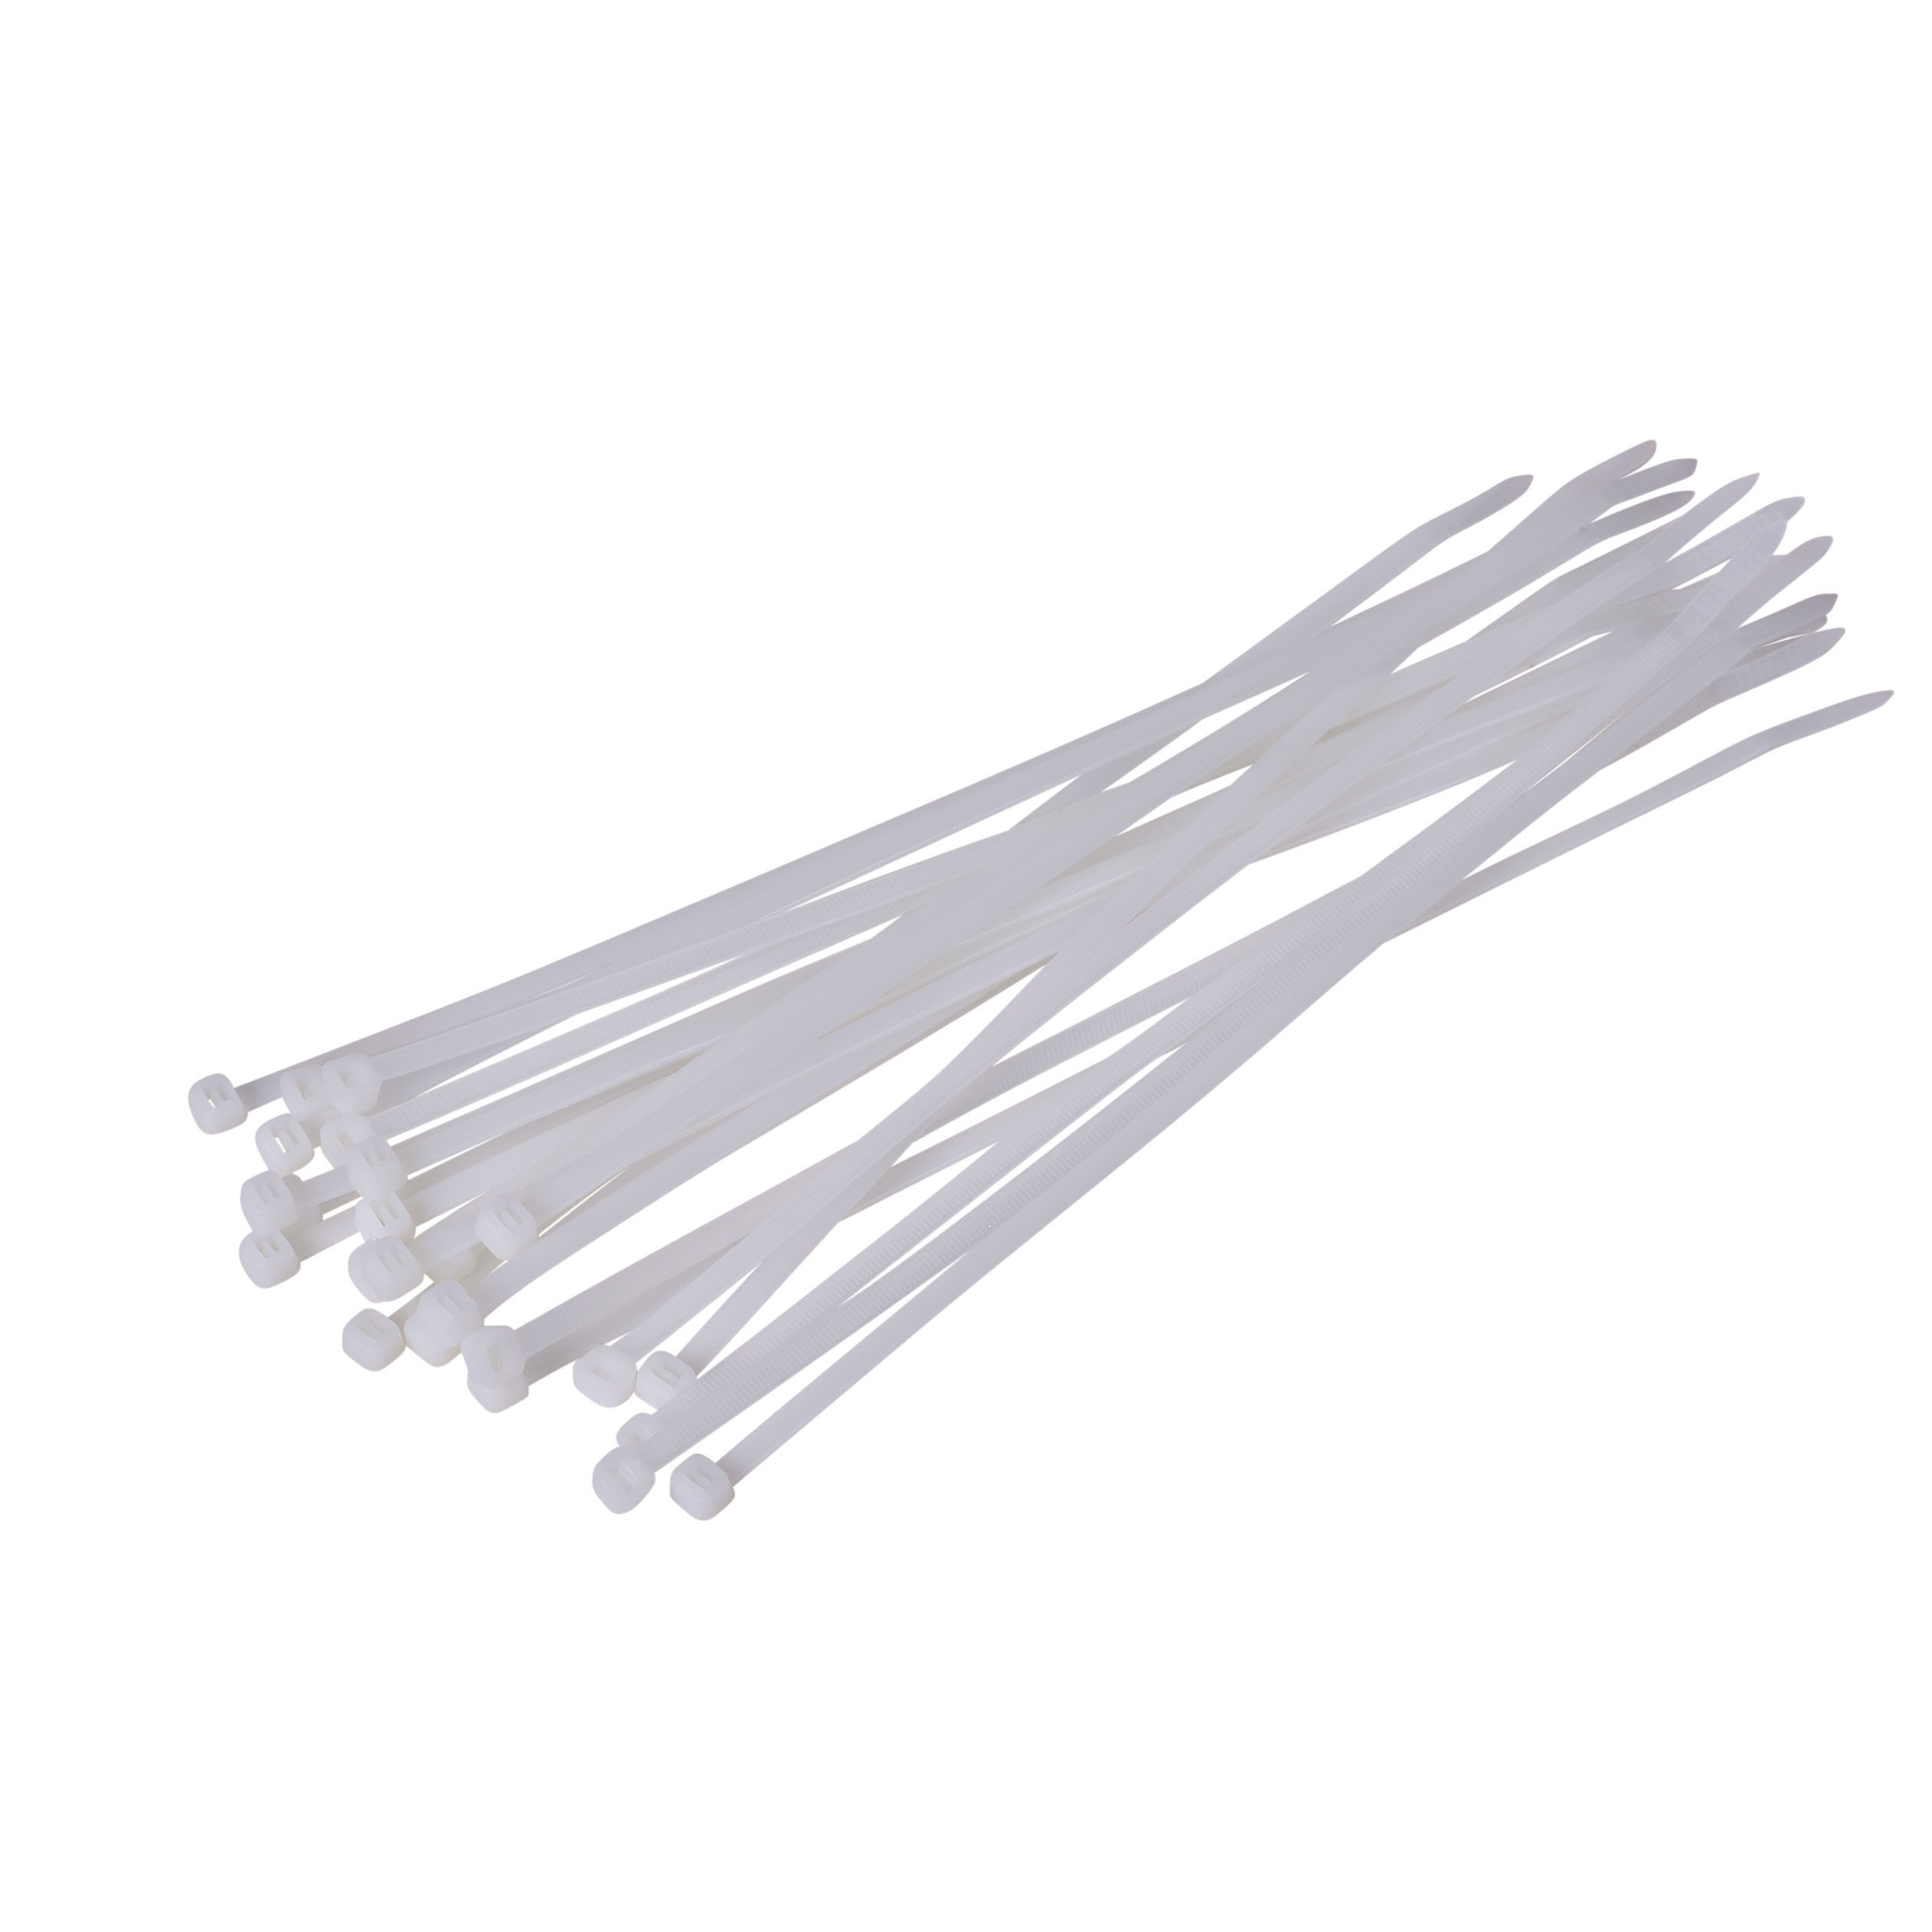 CABLE TIES 11" LG NYLON 33851 F/ 3" DIA CABLE, TUBING ECT